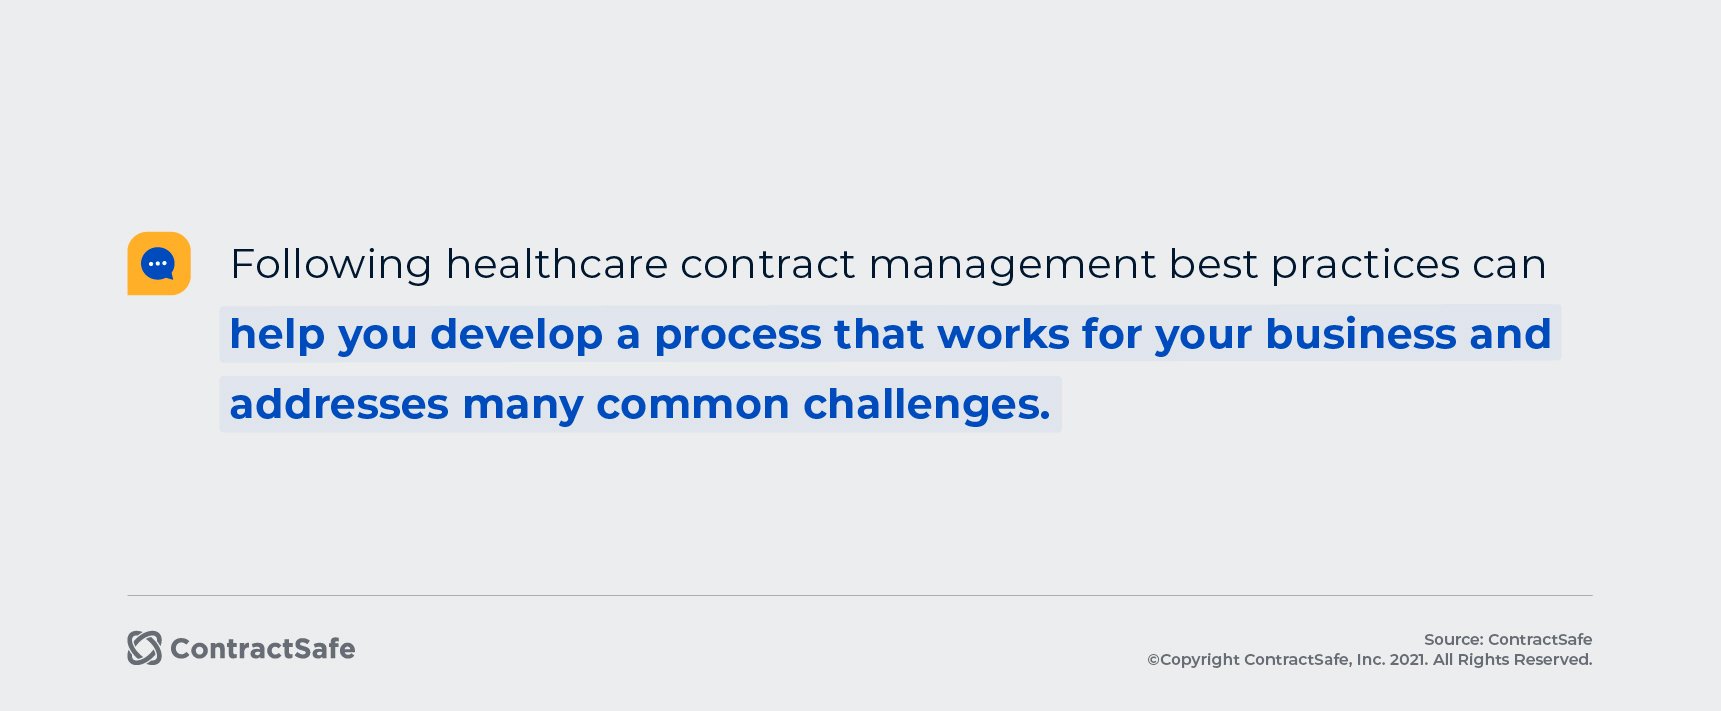 Following healthcare contract management best practices can help you develop a process that works for your business and addresses many common challenges. 